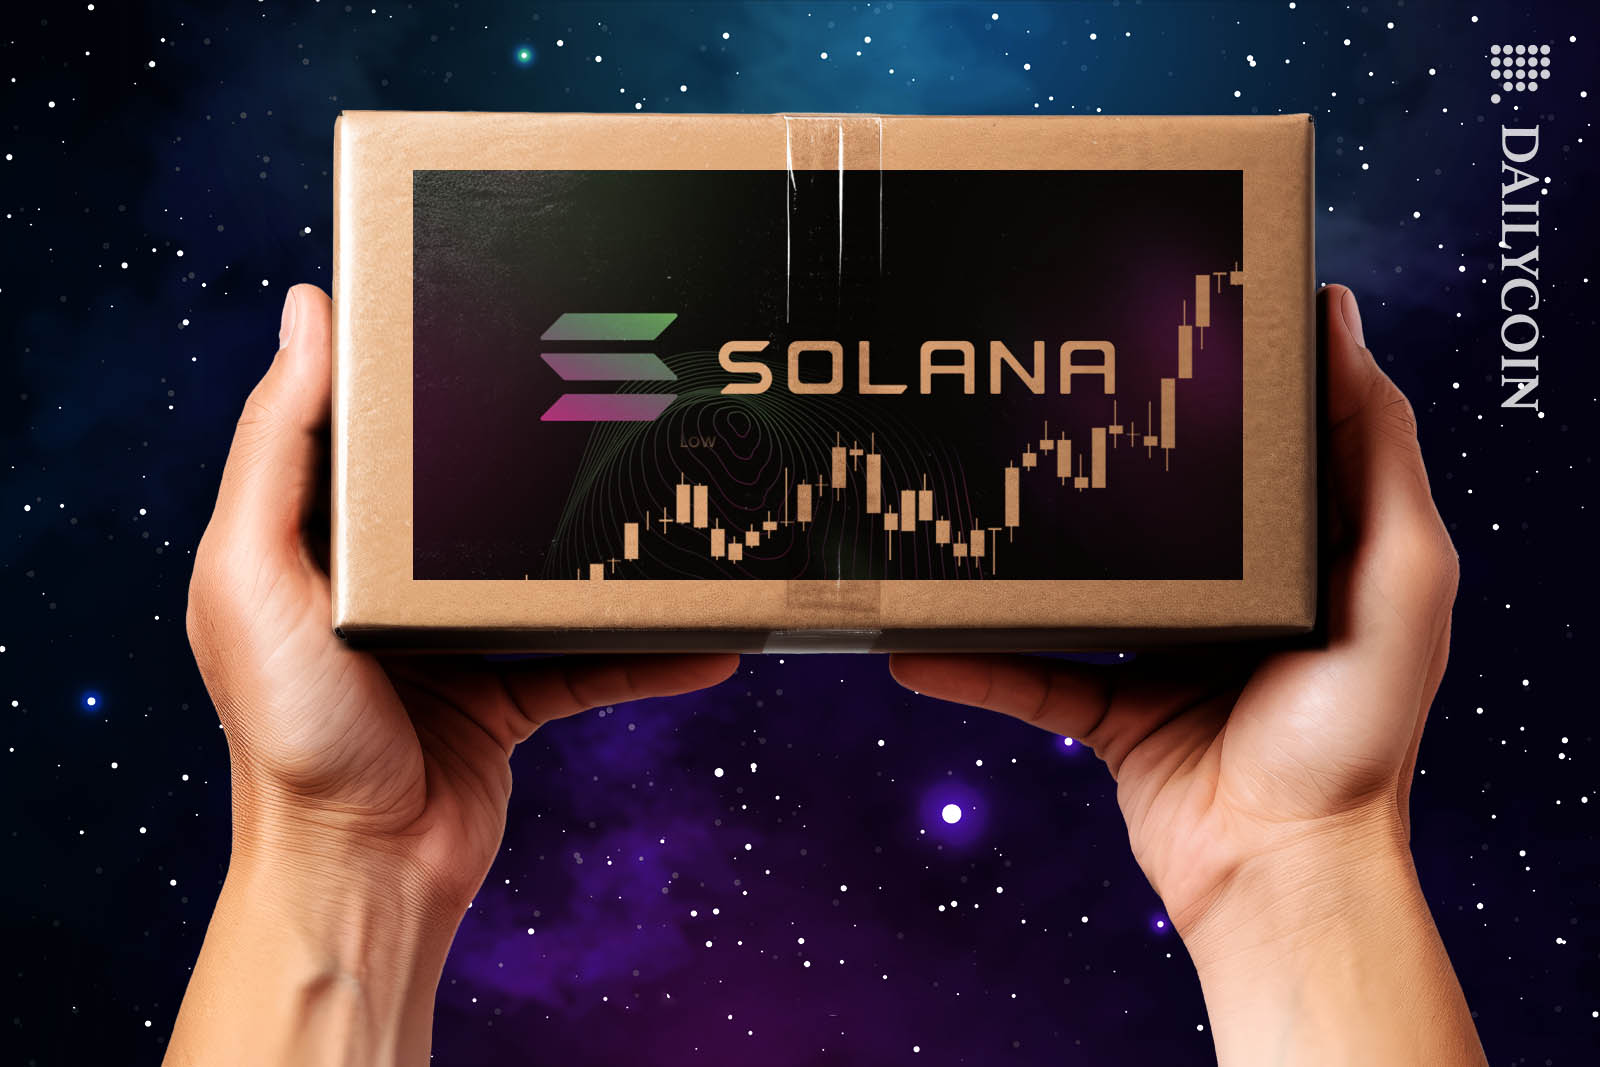 Hands holding up a Solana box.